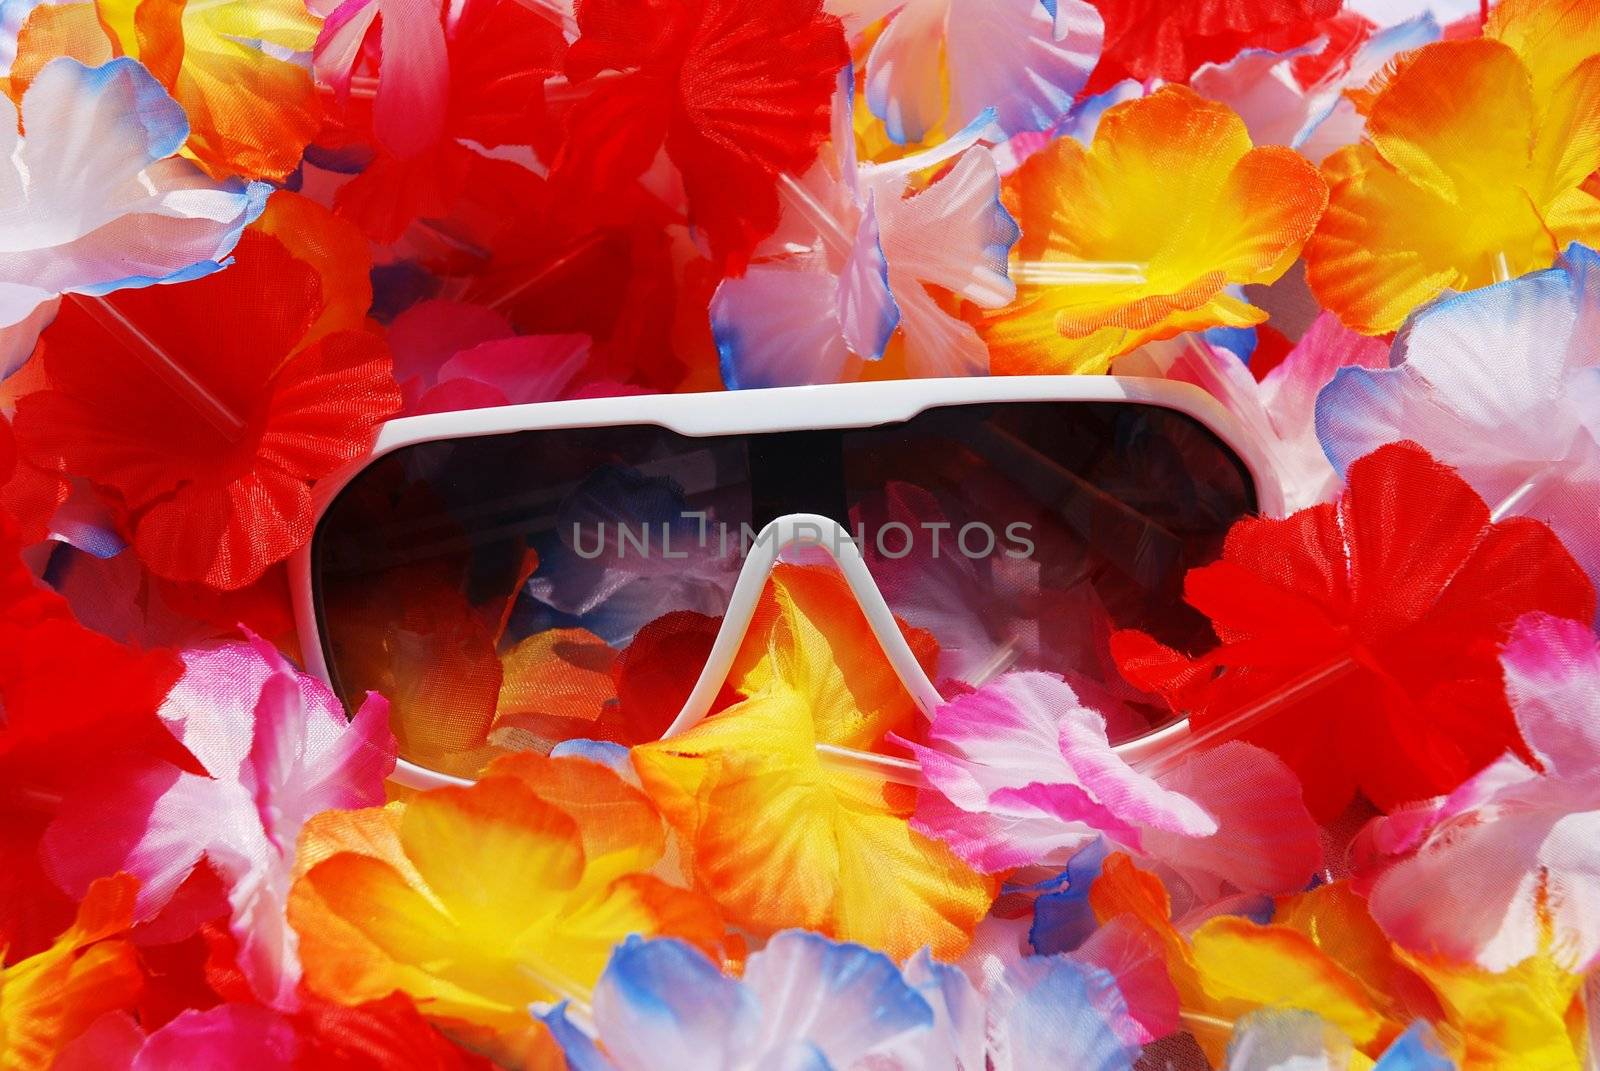 Sunglasses on flowerful lei. Celebrate your life and wear sunglasses at night